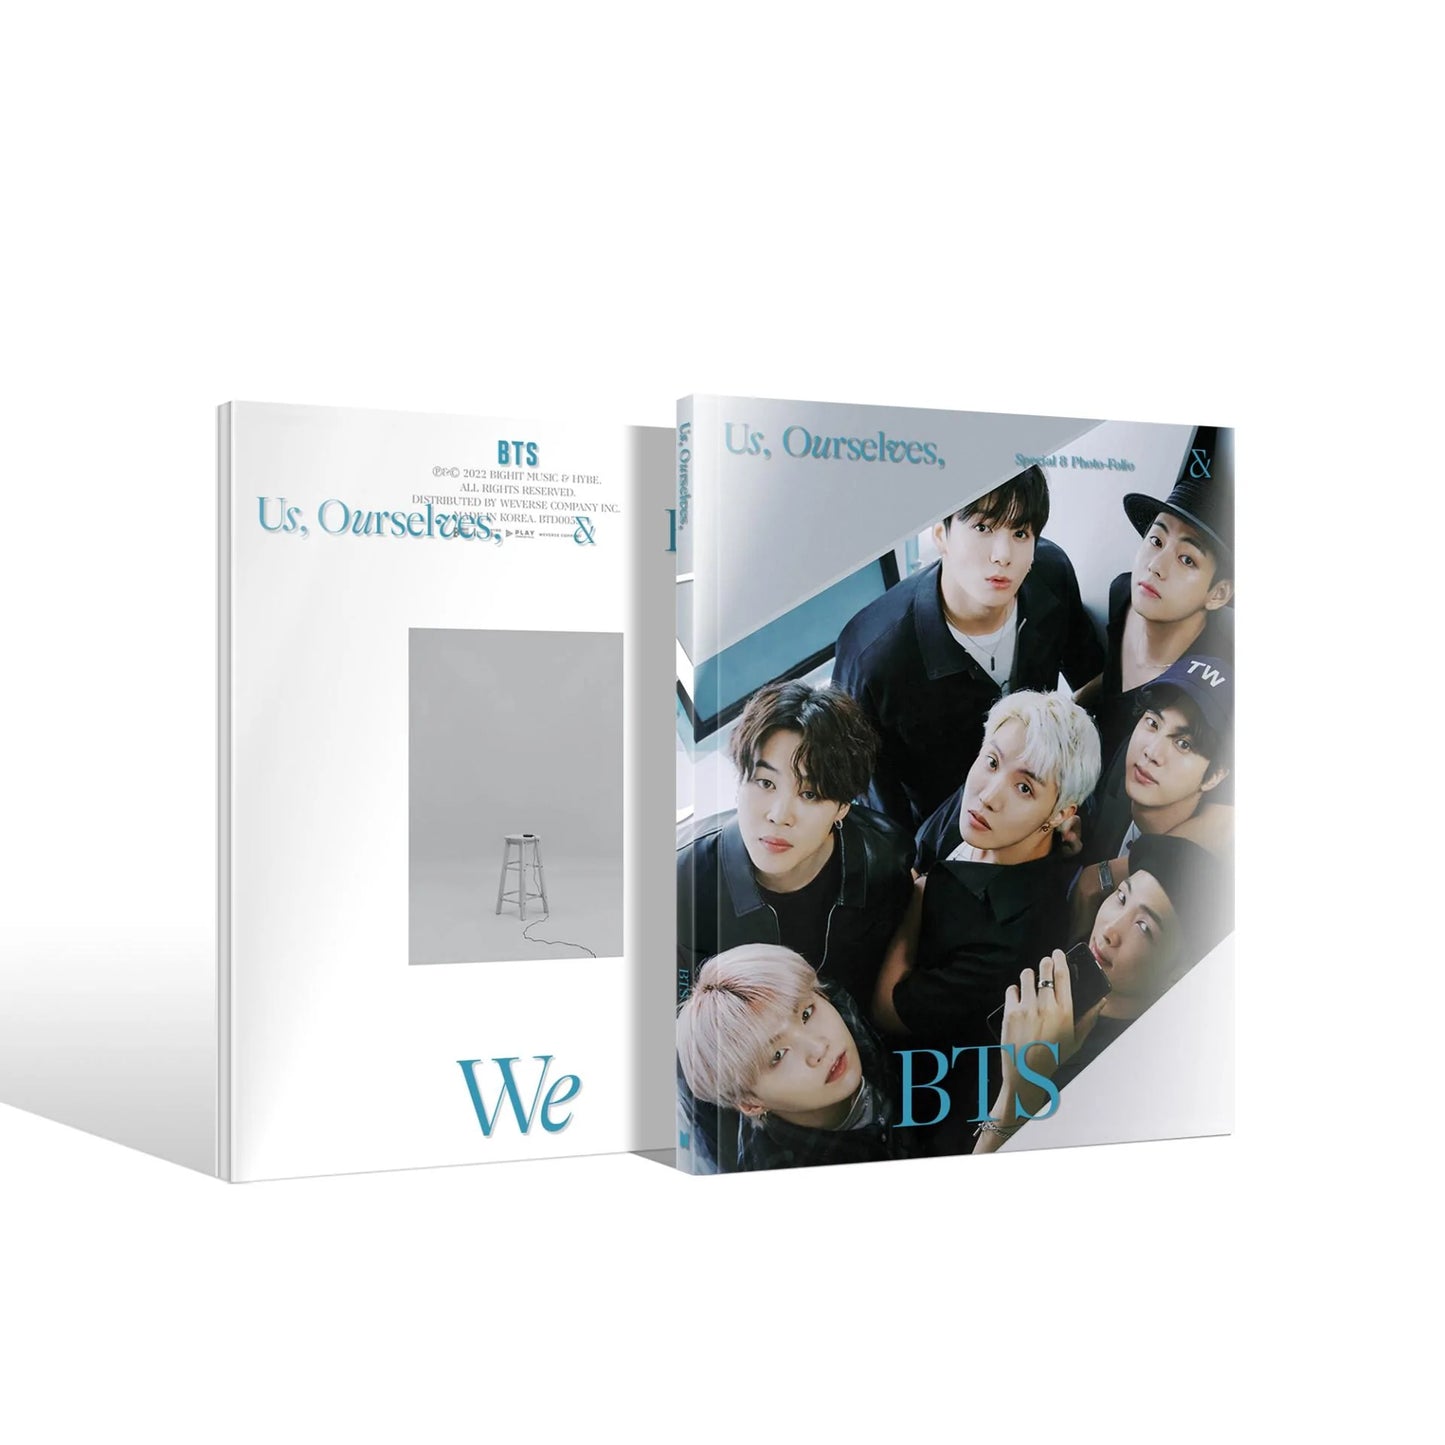 BTS SPECIAL 8 PHOTO-FOLIO US, OURSELVES, AND BTS 'WE'